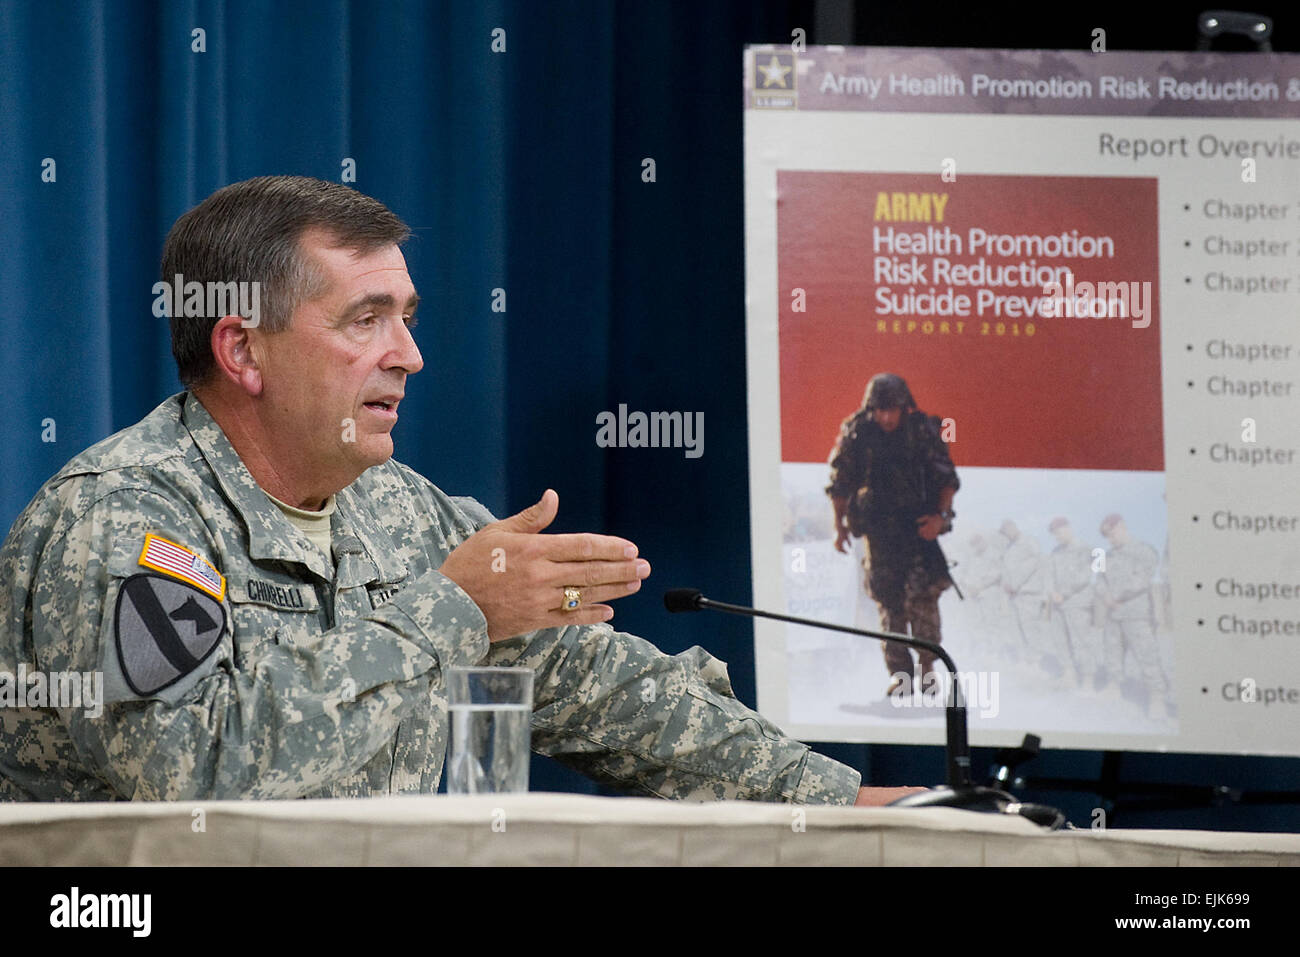 Vice Chief of Staff of the Army, Gen. Peter Chiarelli, discusses the Army's Health Promotion, Risk Reduction, and Suicide Prevention Report during a press conference at the Pentagon, Washington D.C., July 29, 2010.  The report was a 15-month focused effort to better understand the increasing rate of suicides in the force.  Army photo by D. Myles Cullen Stock Photo